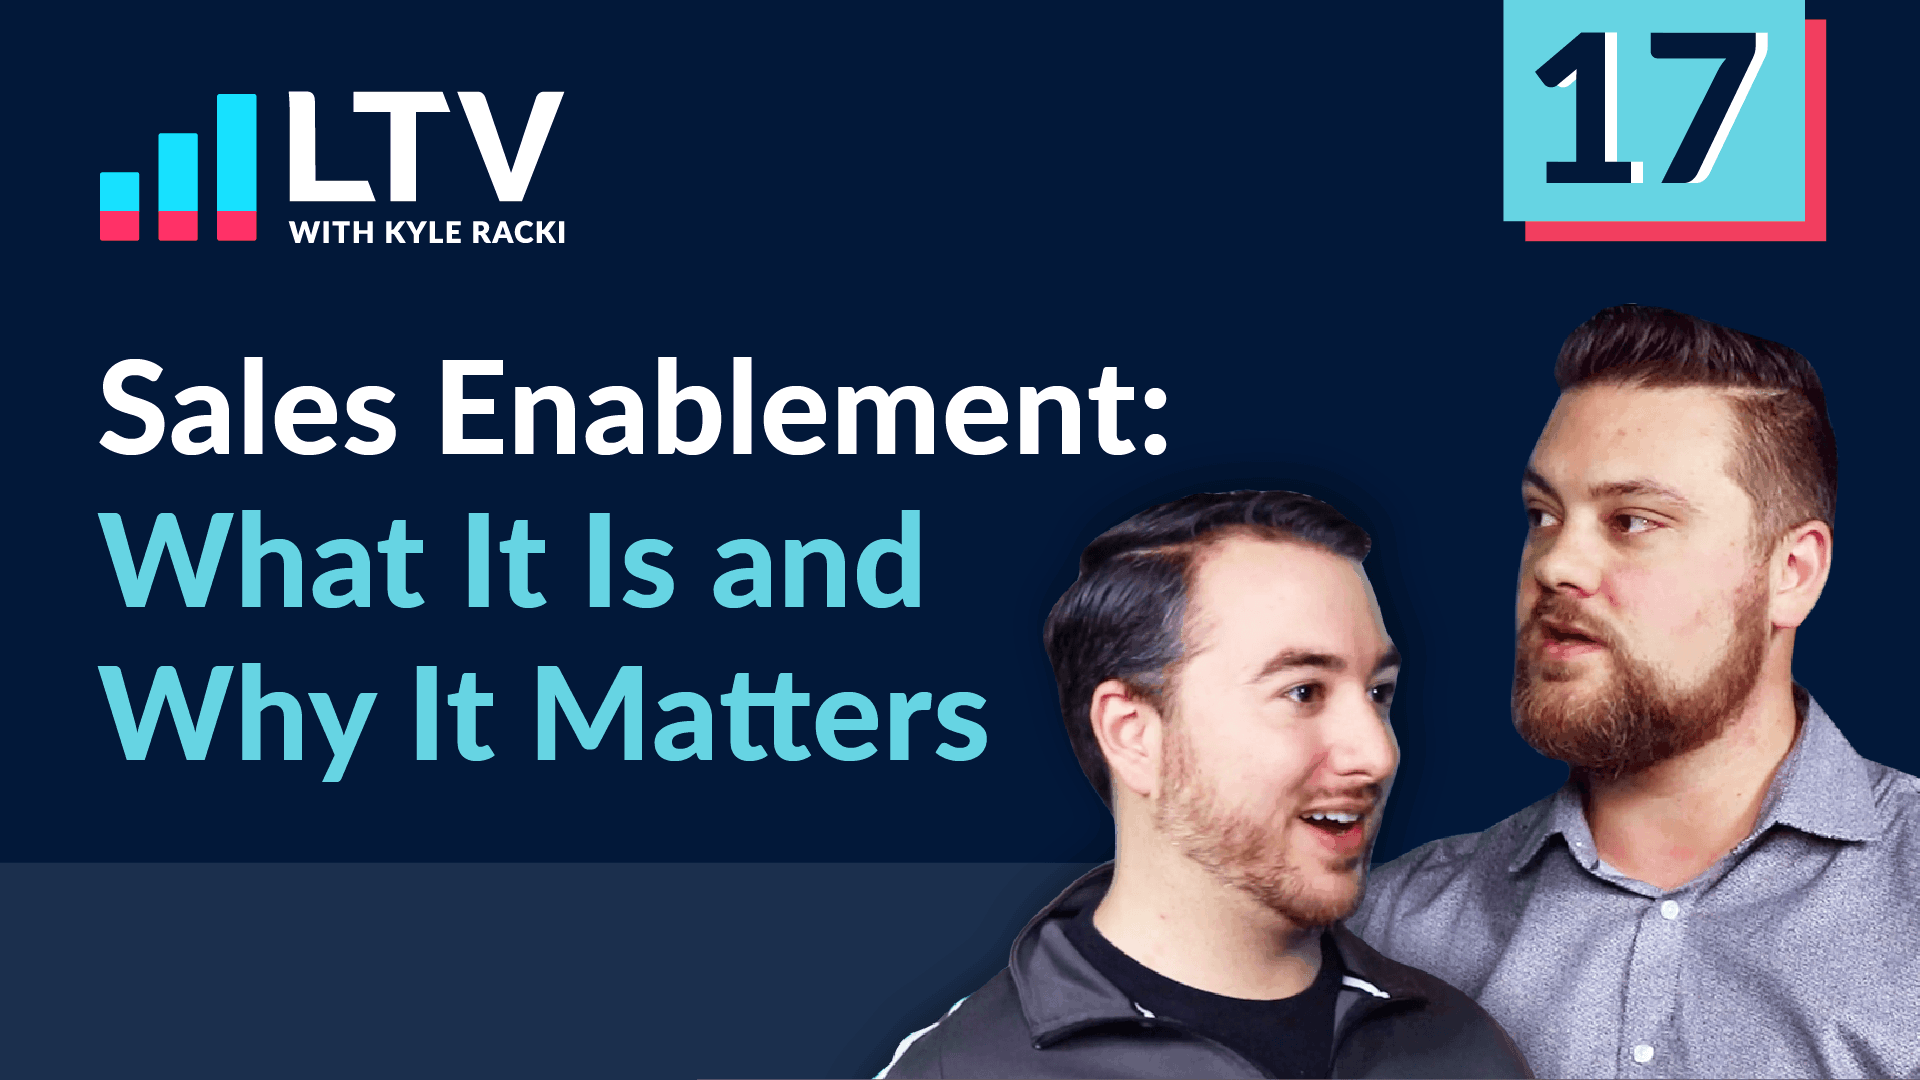 LTV Podcast Episode 17: Sales Enablement - What Is It and Why It Matters